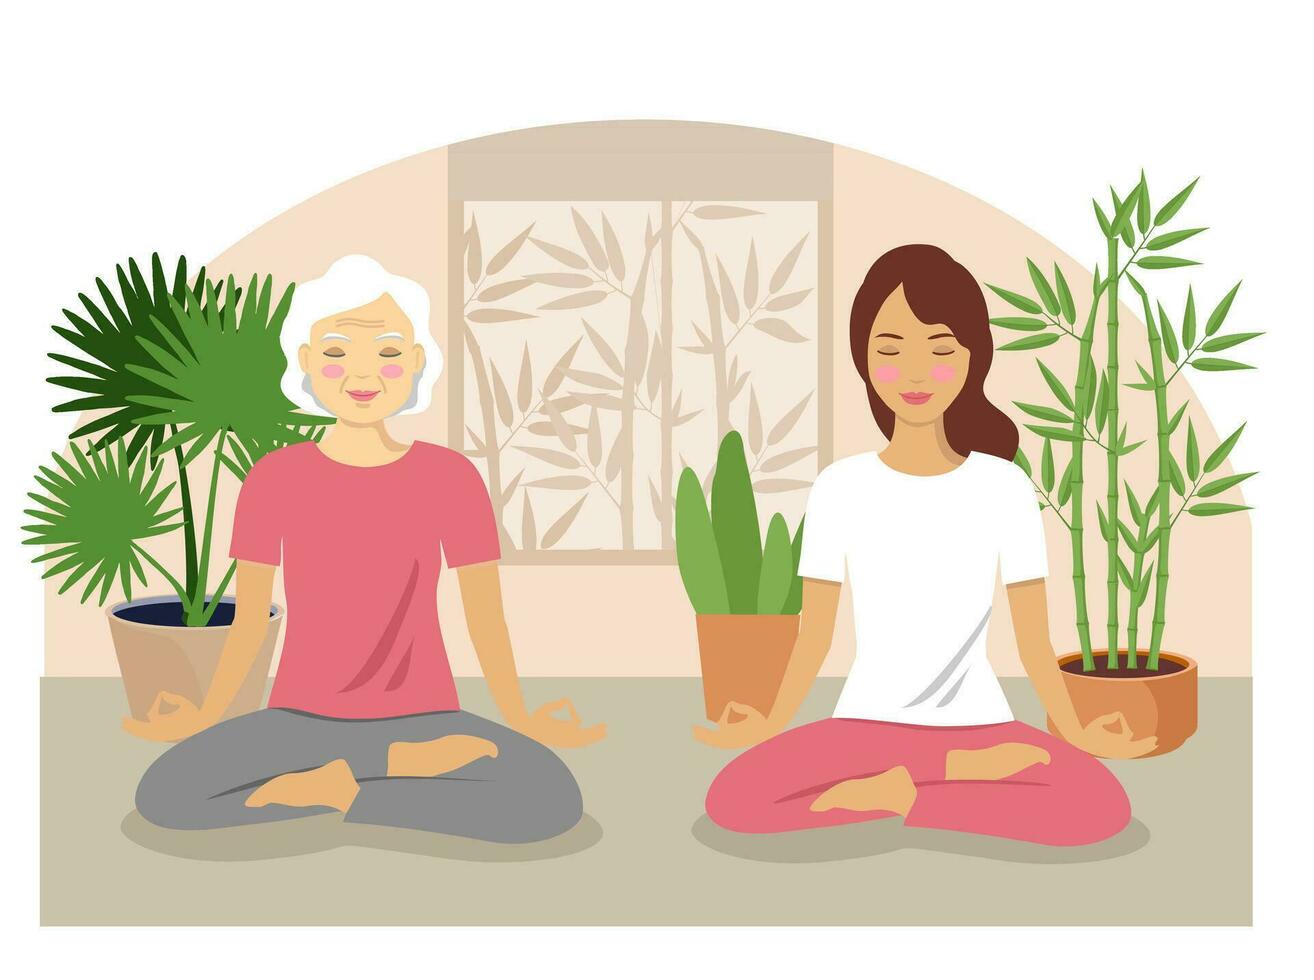 Smiling senior woman and a young woman meditating relaxing. Mother and daughter or Granny and granddaughter in yoga pose breathing exercises at home. Old age tranquility generation life style concept vector